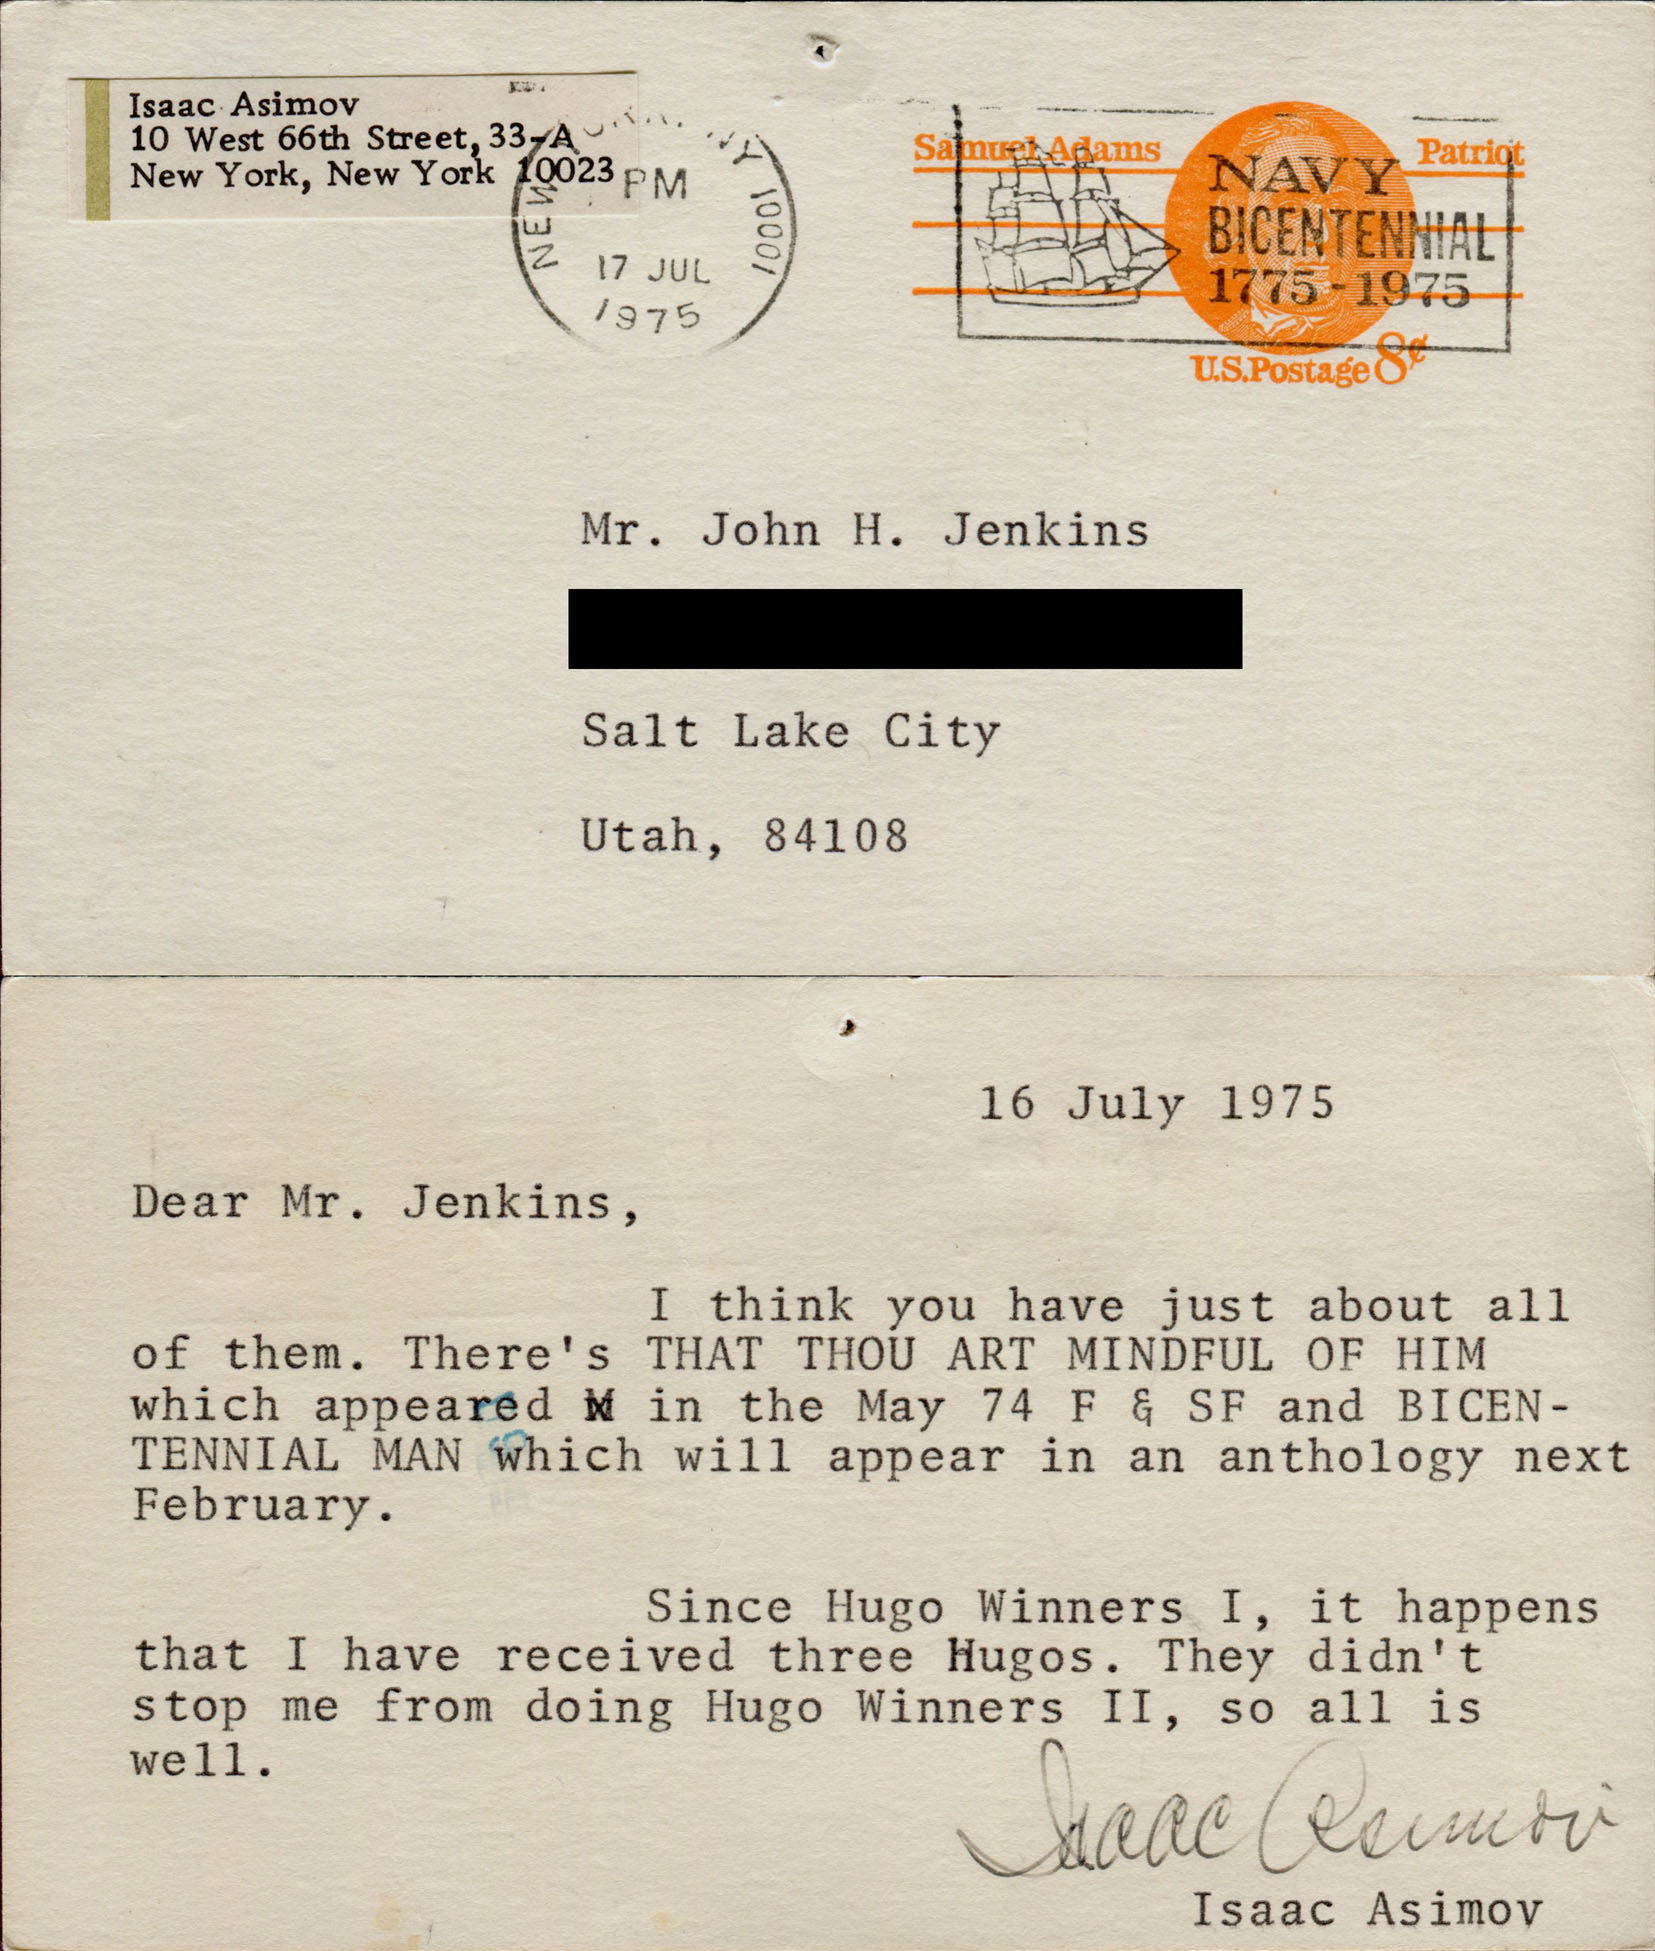 16 July 1975. Dear Mr. Jenkins, I think you have just about all of them. There's THAT THOU ART MINDFUL OF HIM which appeared in the May 74 F & SF and BICENTENNIAL MAN which will appear in an anthology next February. Since Hugo Winners I, it happens that I have received three Hugos. They didn't stop me from doing Hugo Winners II, so all is well. Isaac Asimov